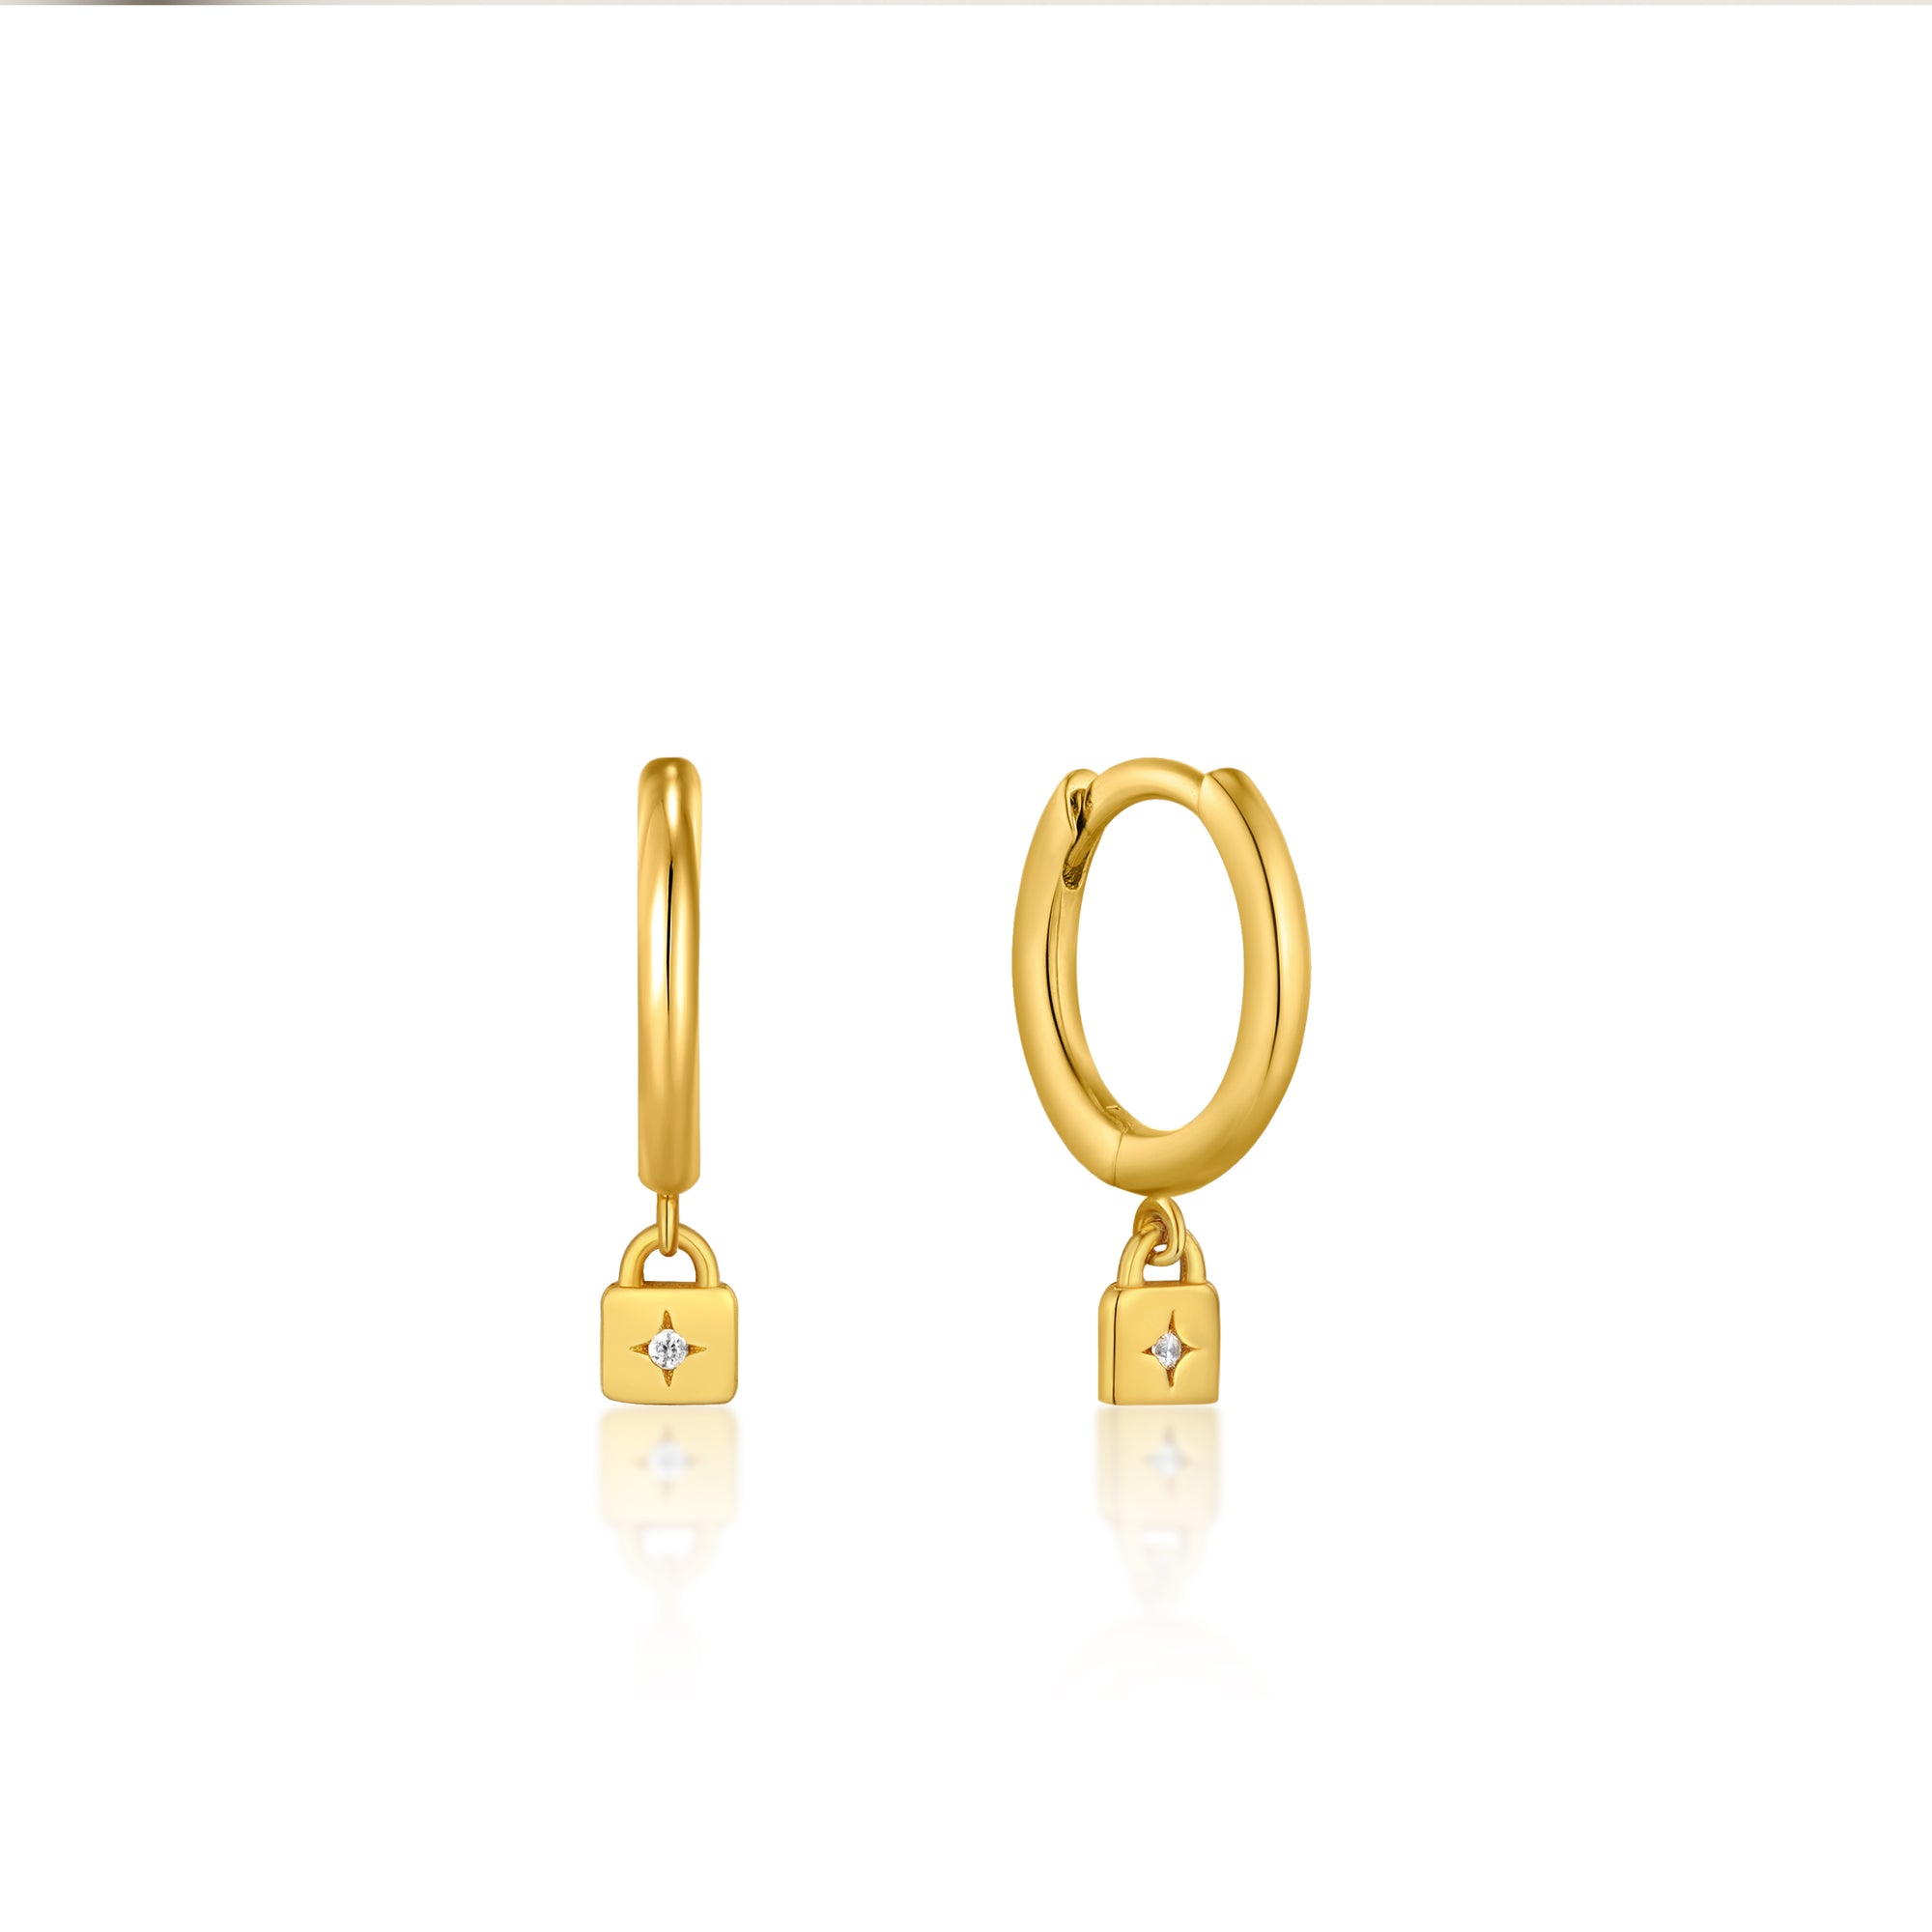 ANIA HAIE ANIA HAIE - Gold Padlock Huggie Hoop Earrings available at The Good Life Boutique